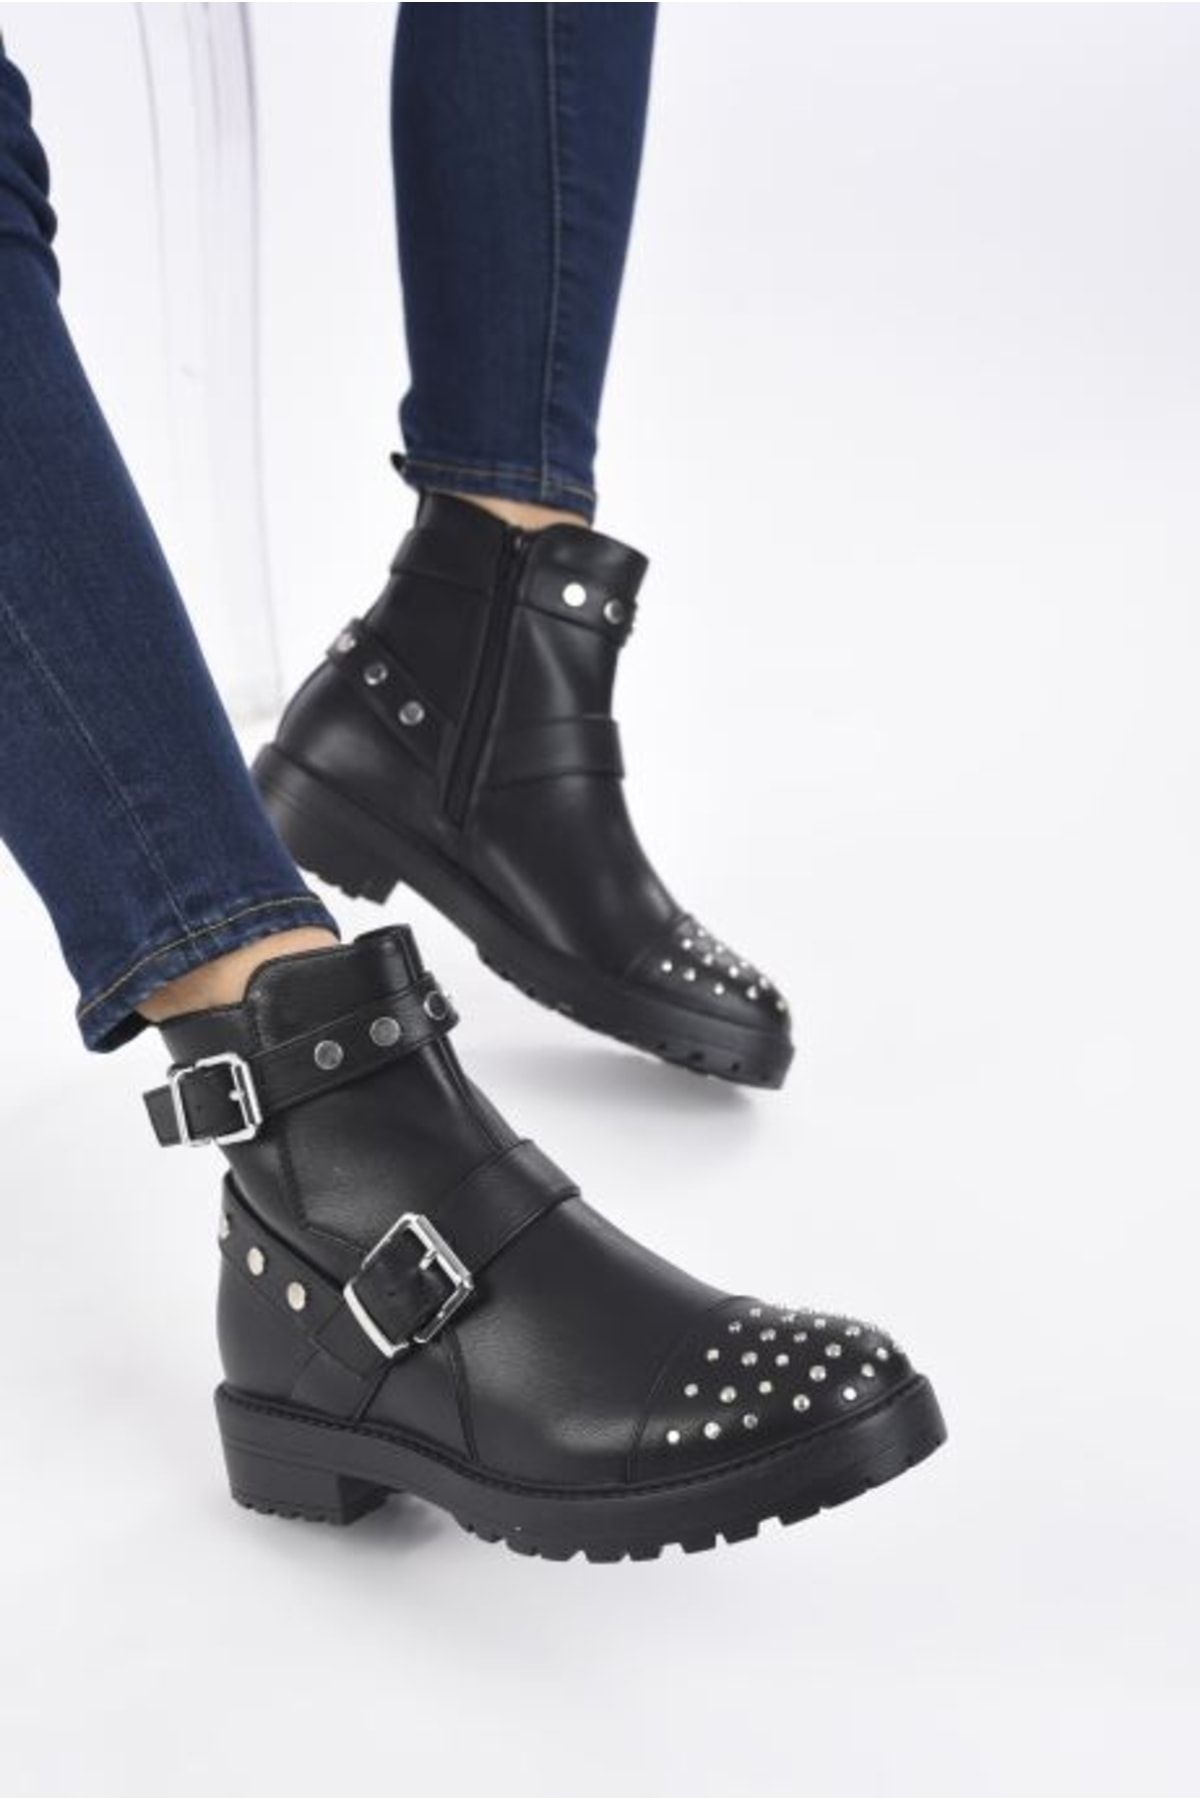 Only Shoes-black-36-